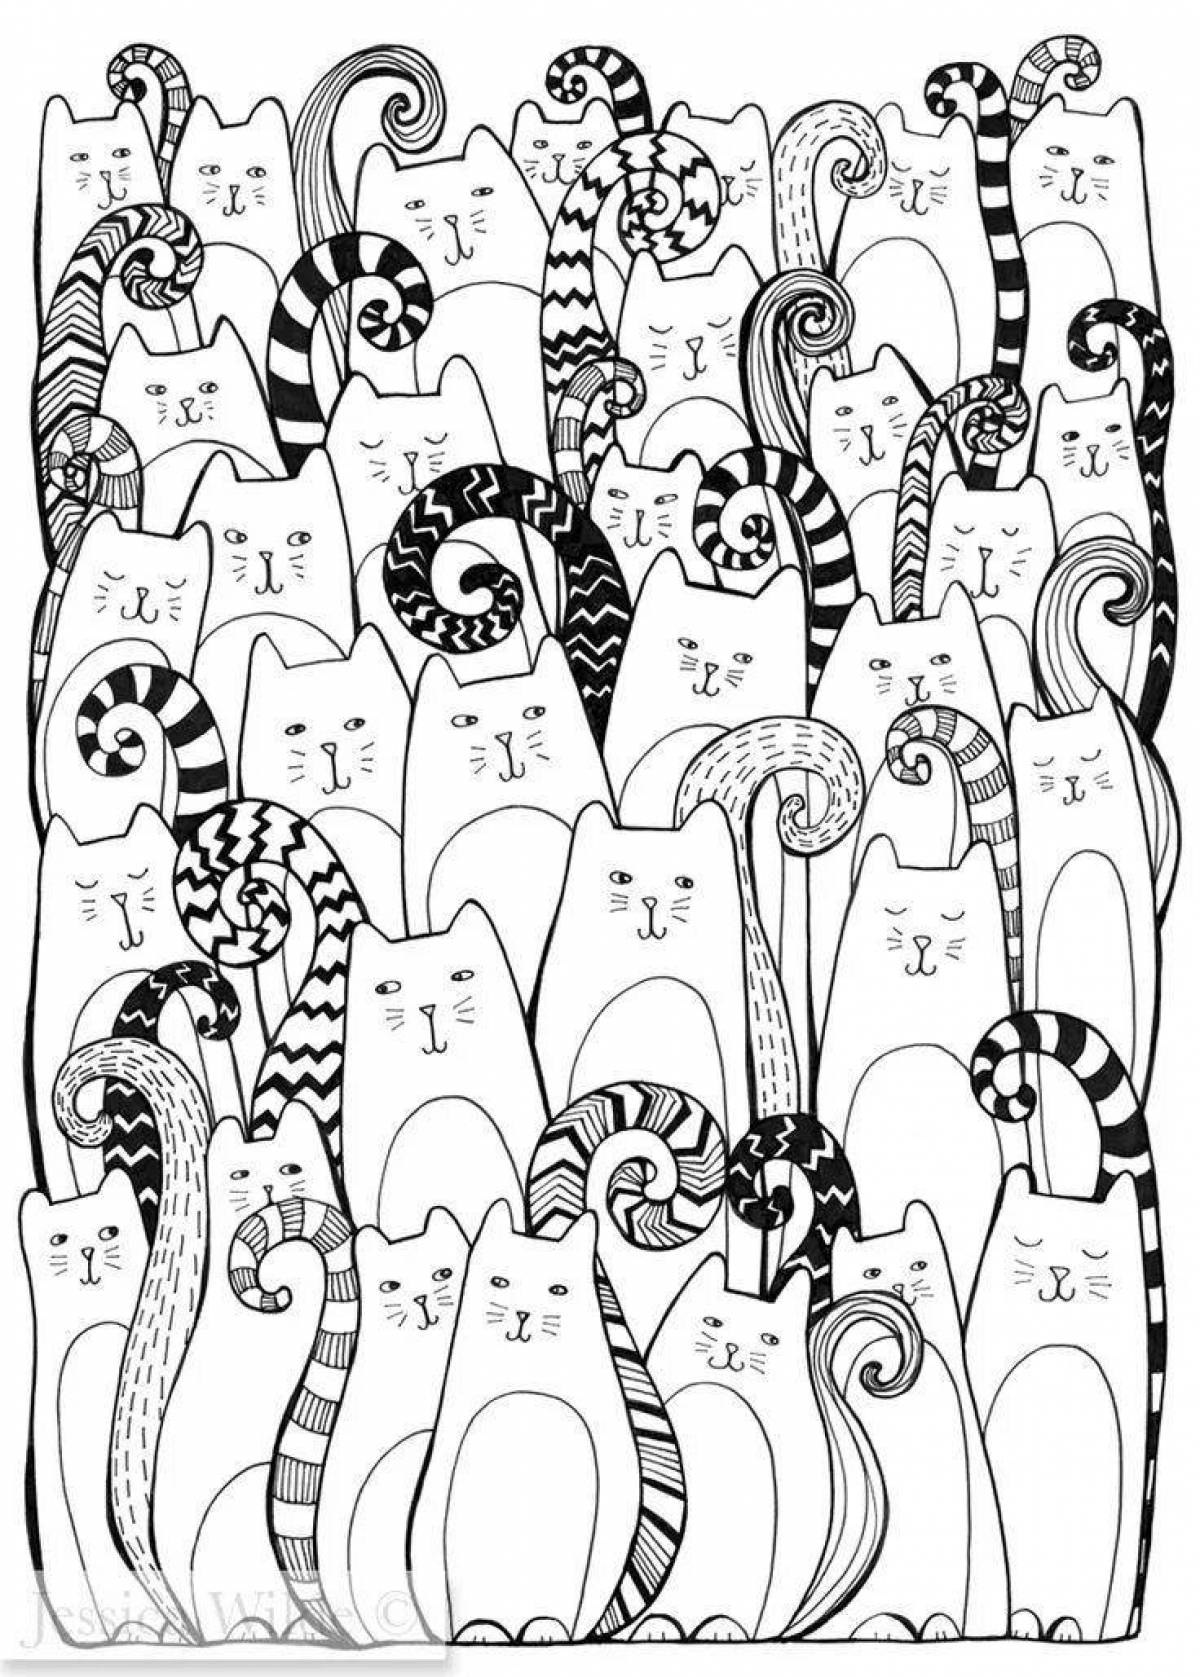 Joyful coloring with lots of cats